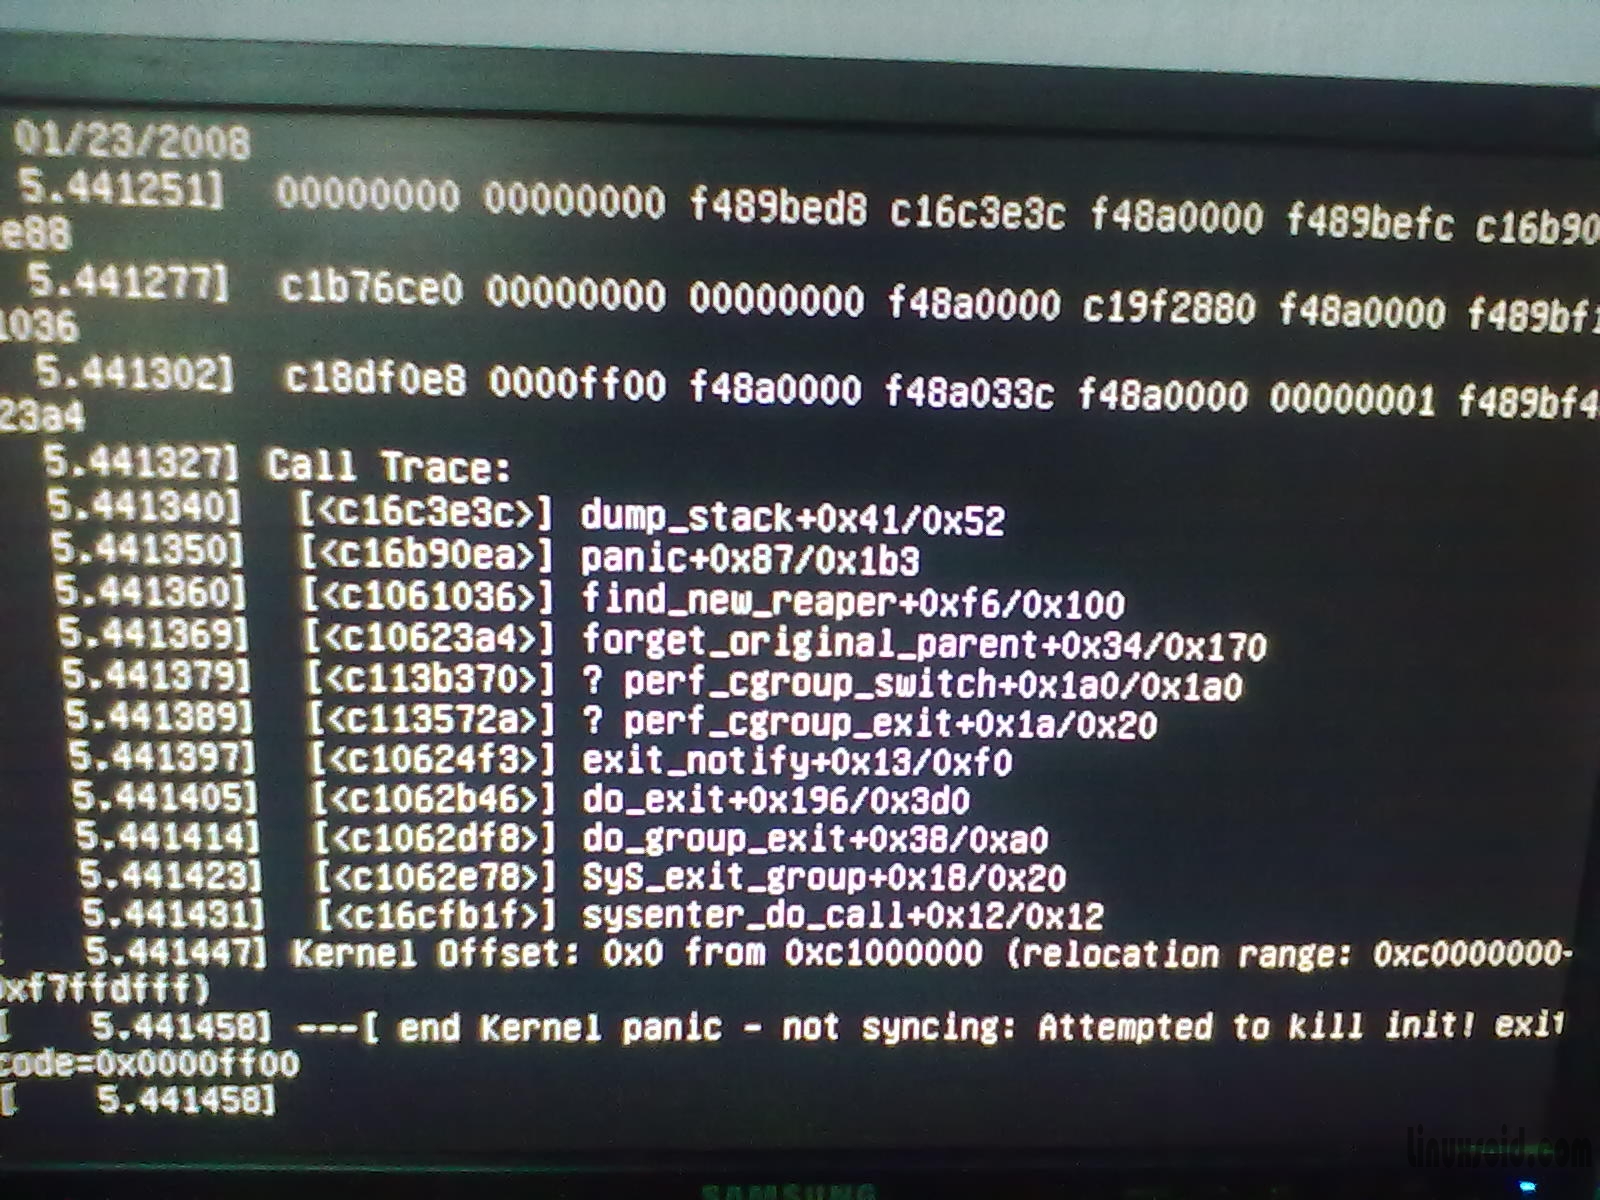 End kernel panic not syncing attempted to kill init exit